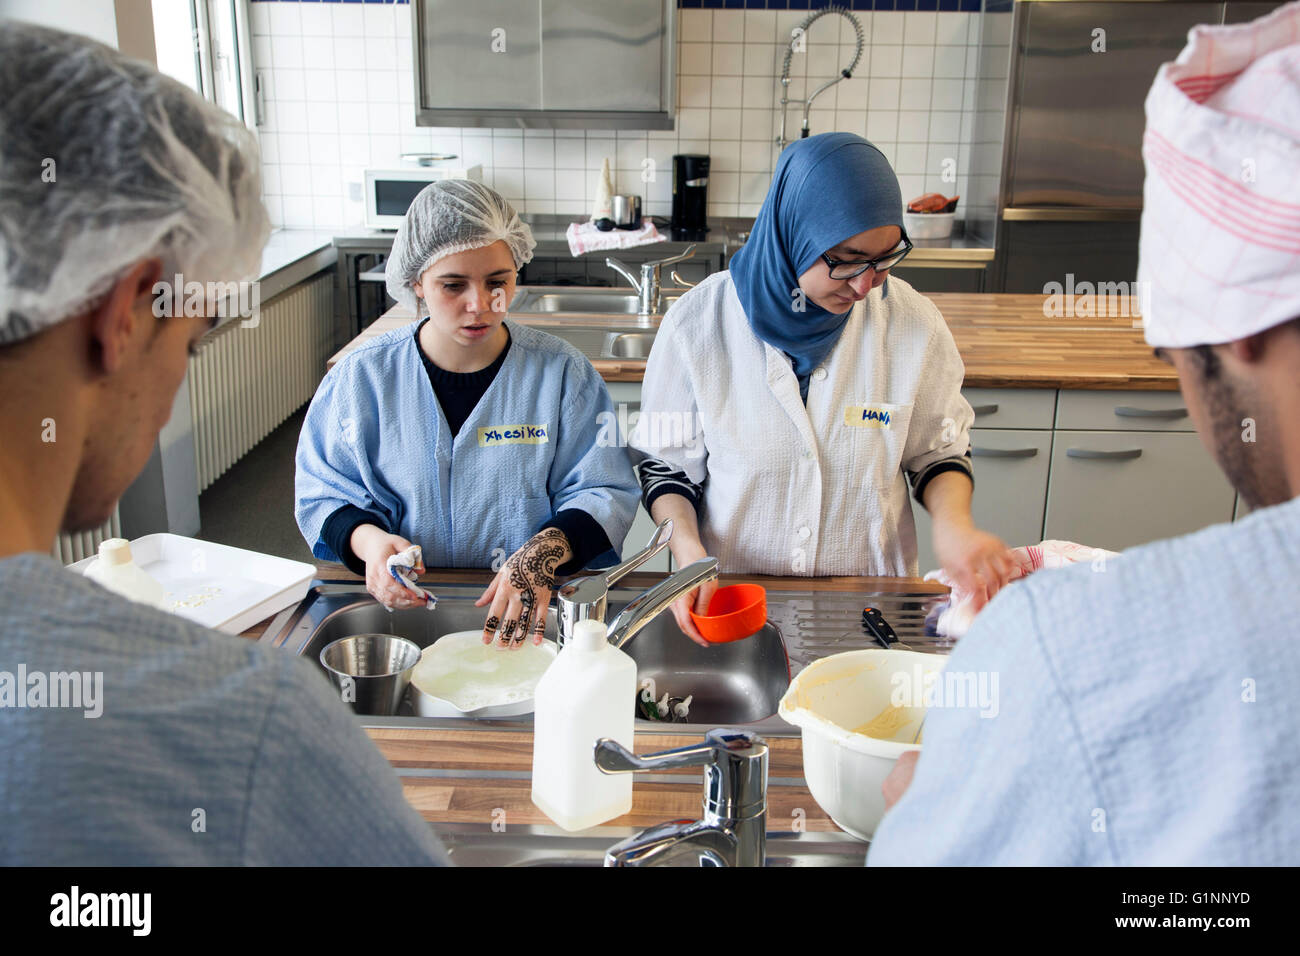 International class during baking a cake in the school kitchen. The trainees wash the kitchen utensils. Stock Photo